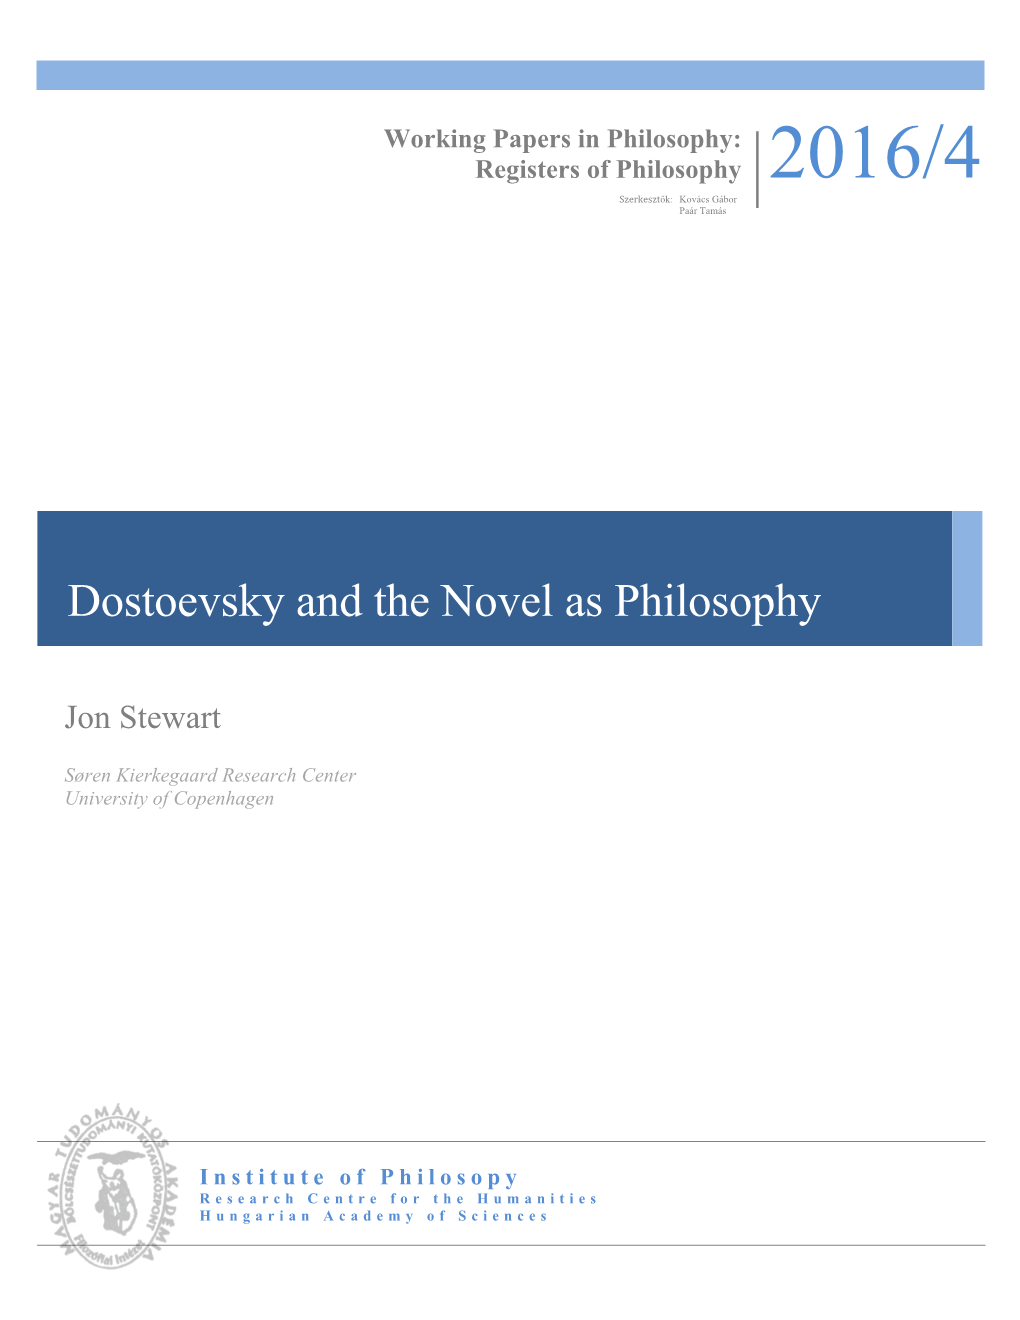 Dostoevsky and the Novel As Philosophy